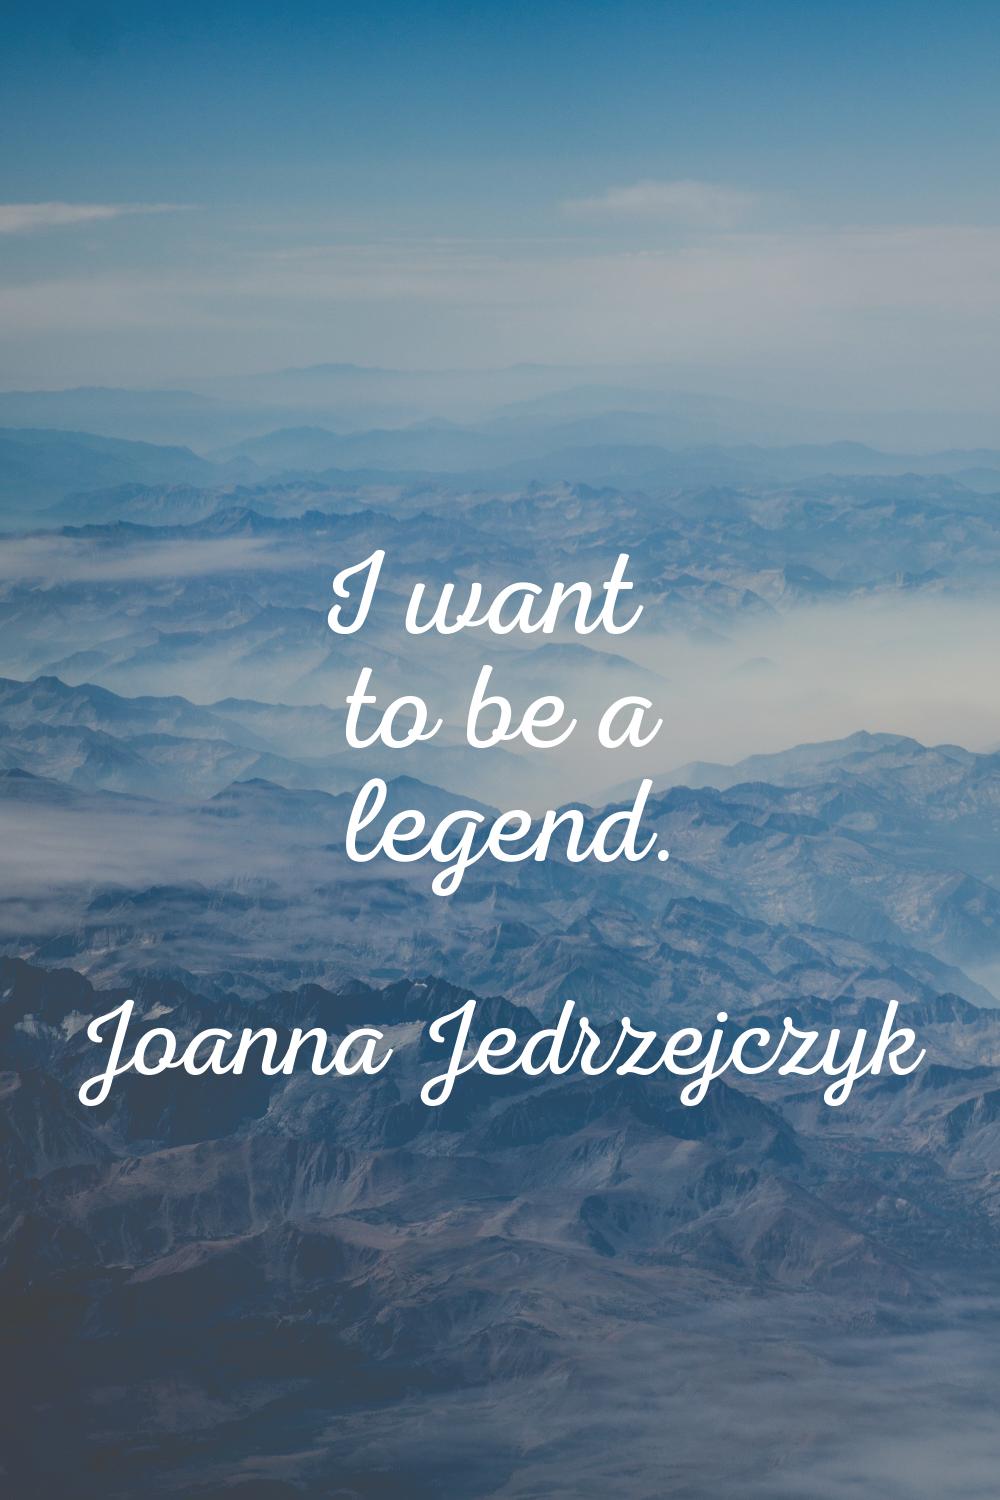 I want to be a legend.